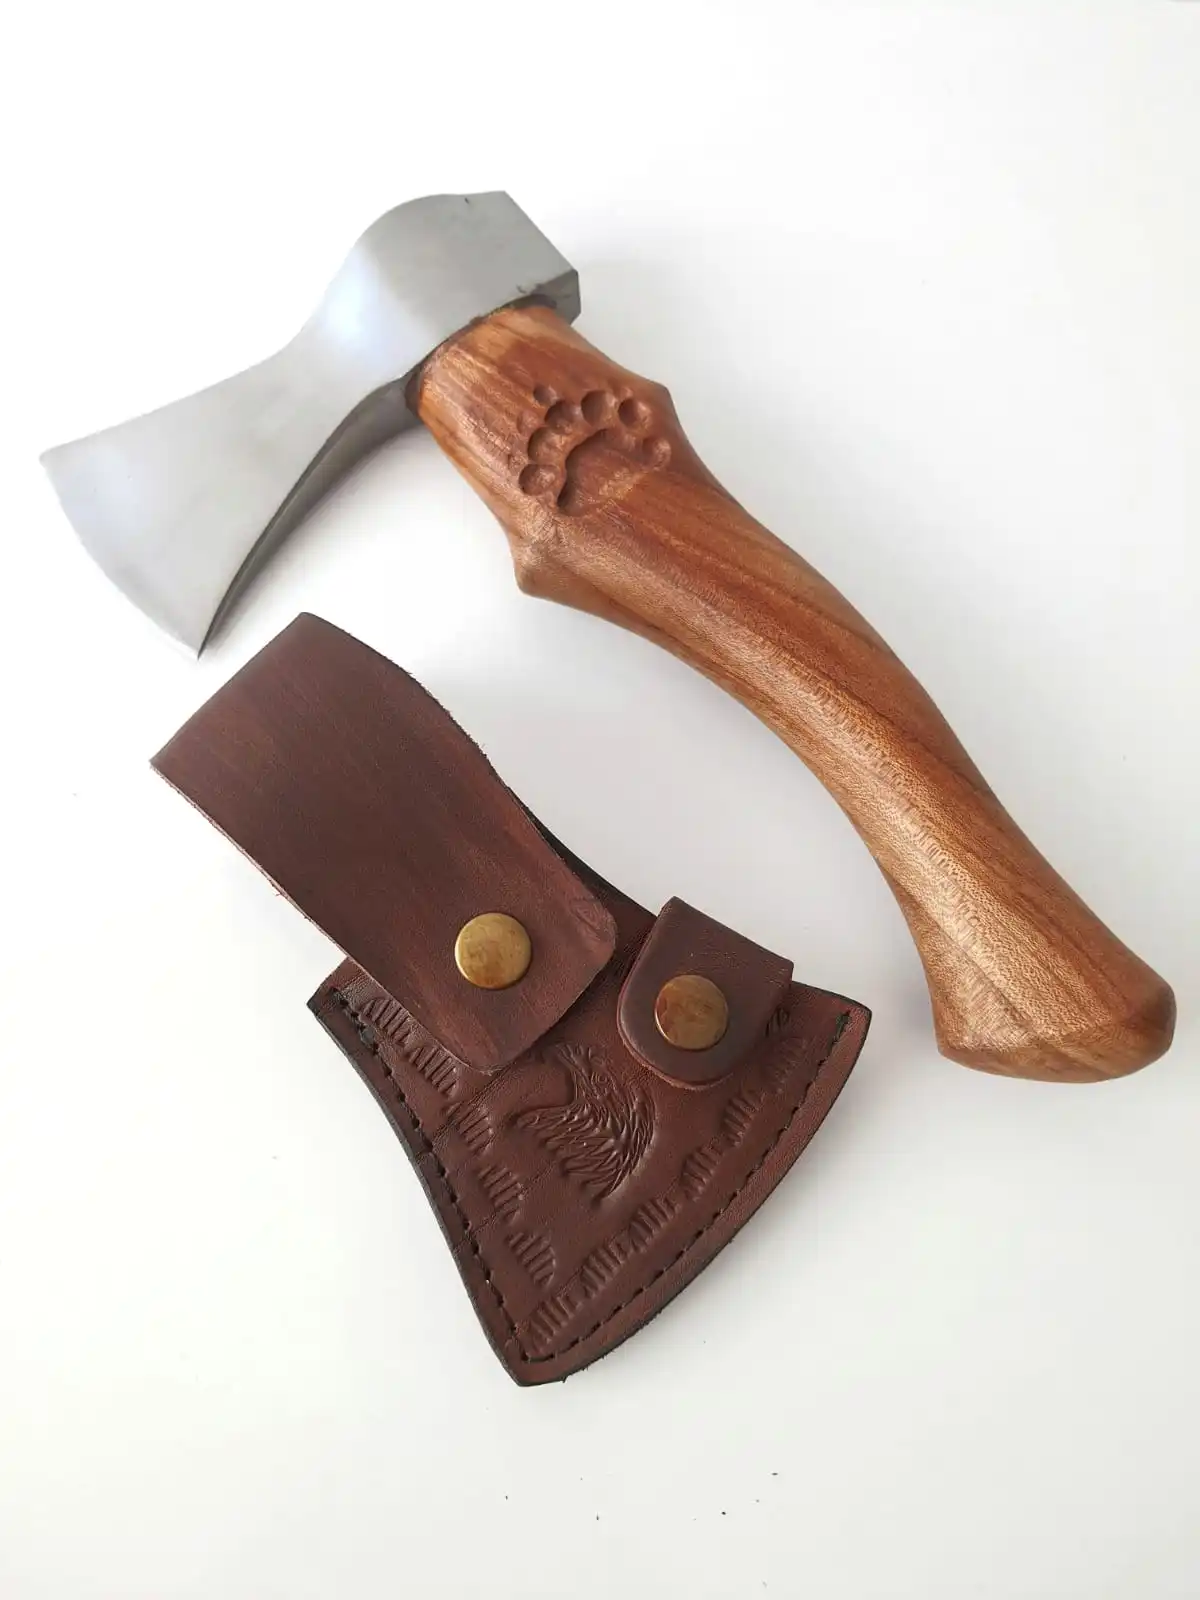 PALTA Tiger Clawed Elm Camping Ax Survival Multitool Axe Tomahawk Hatchet Handmade Forged Carbon Steel Tactical Hunting Outdoor